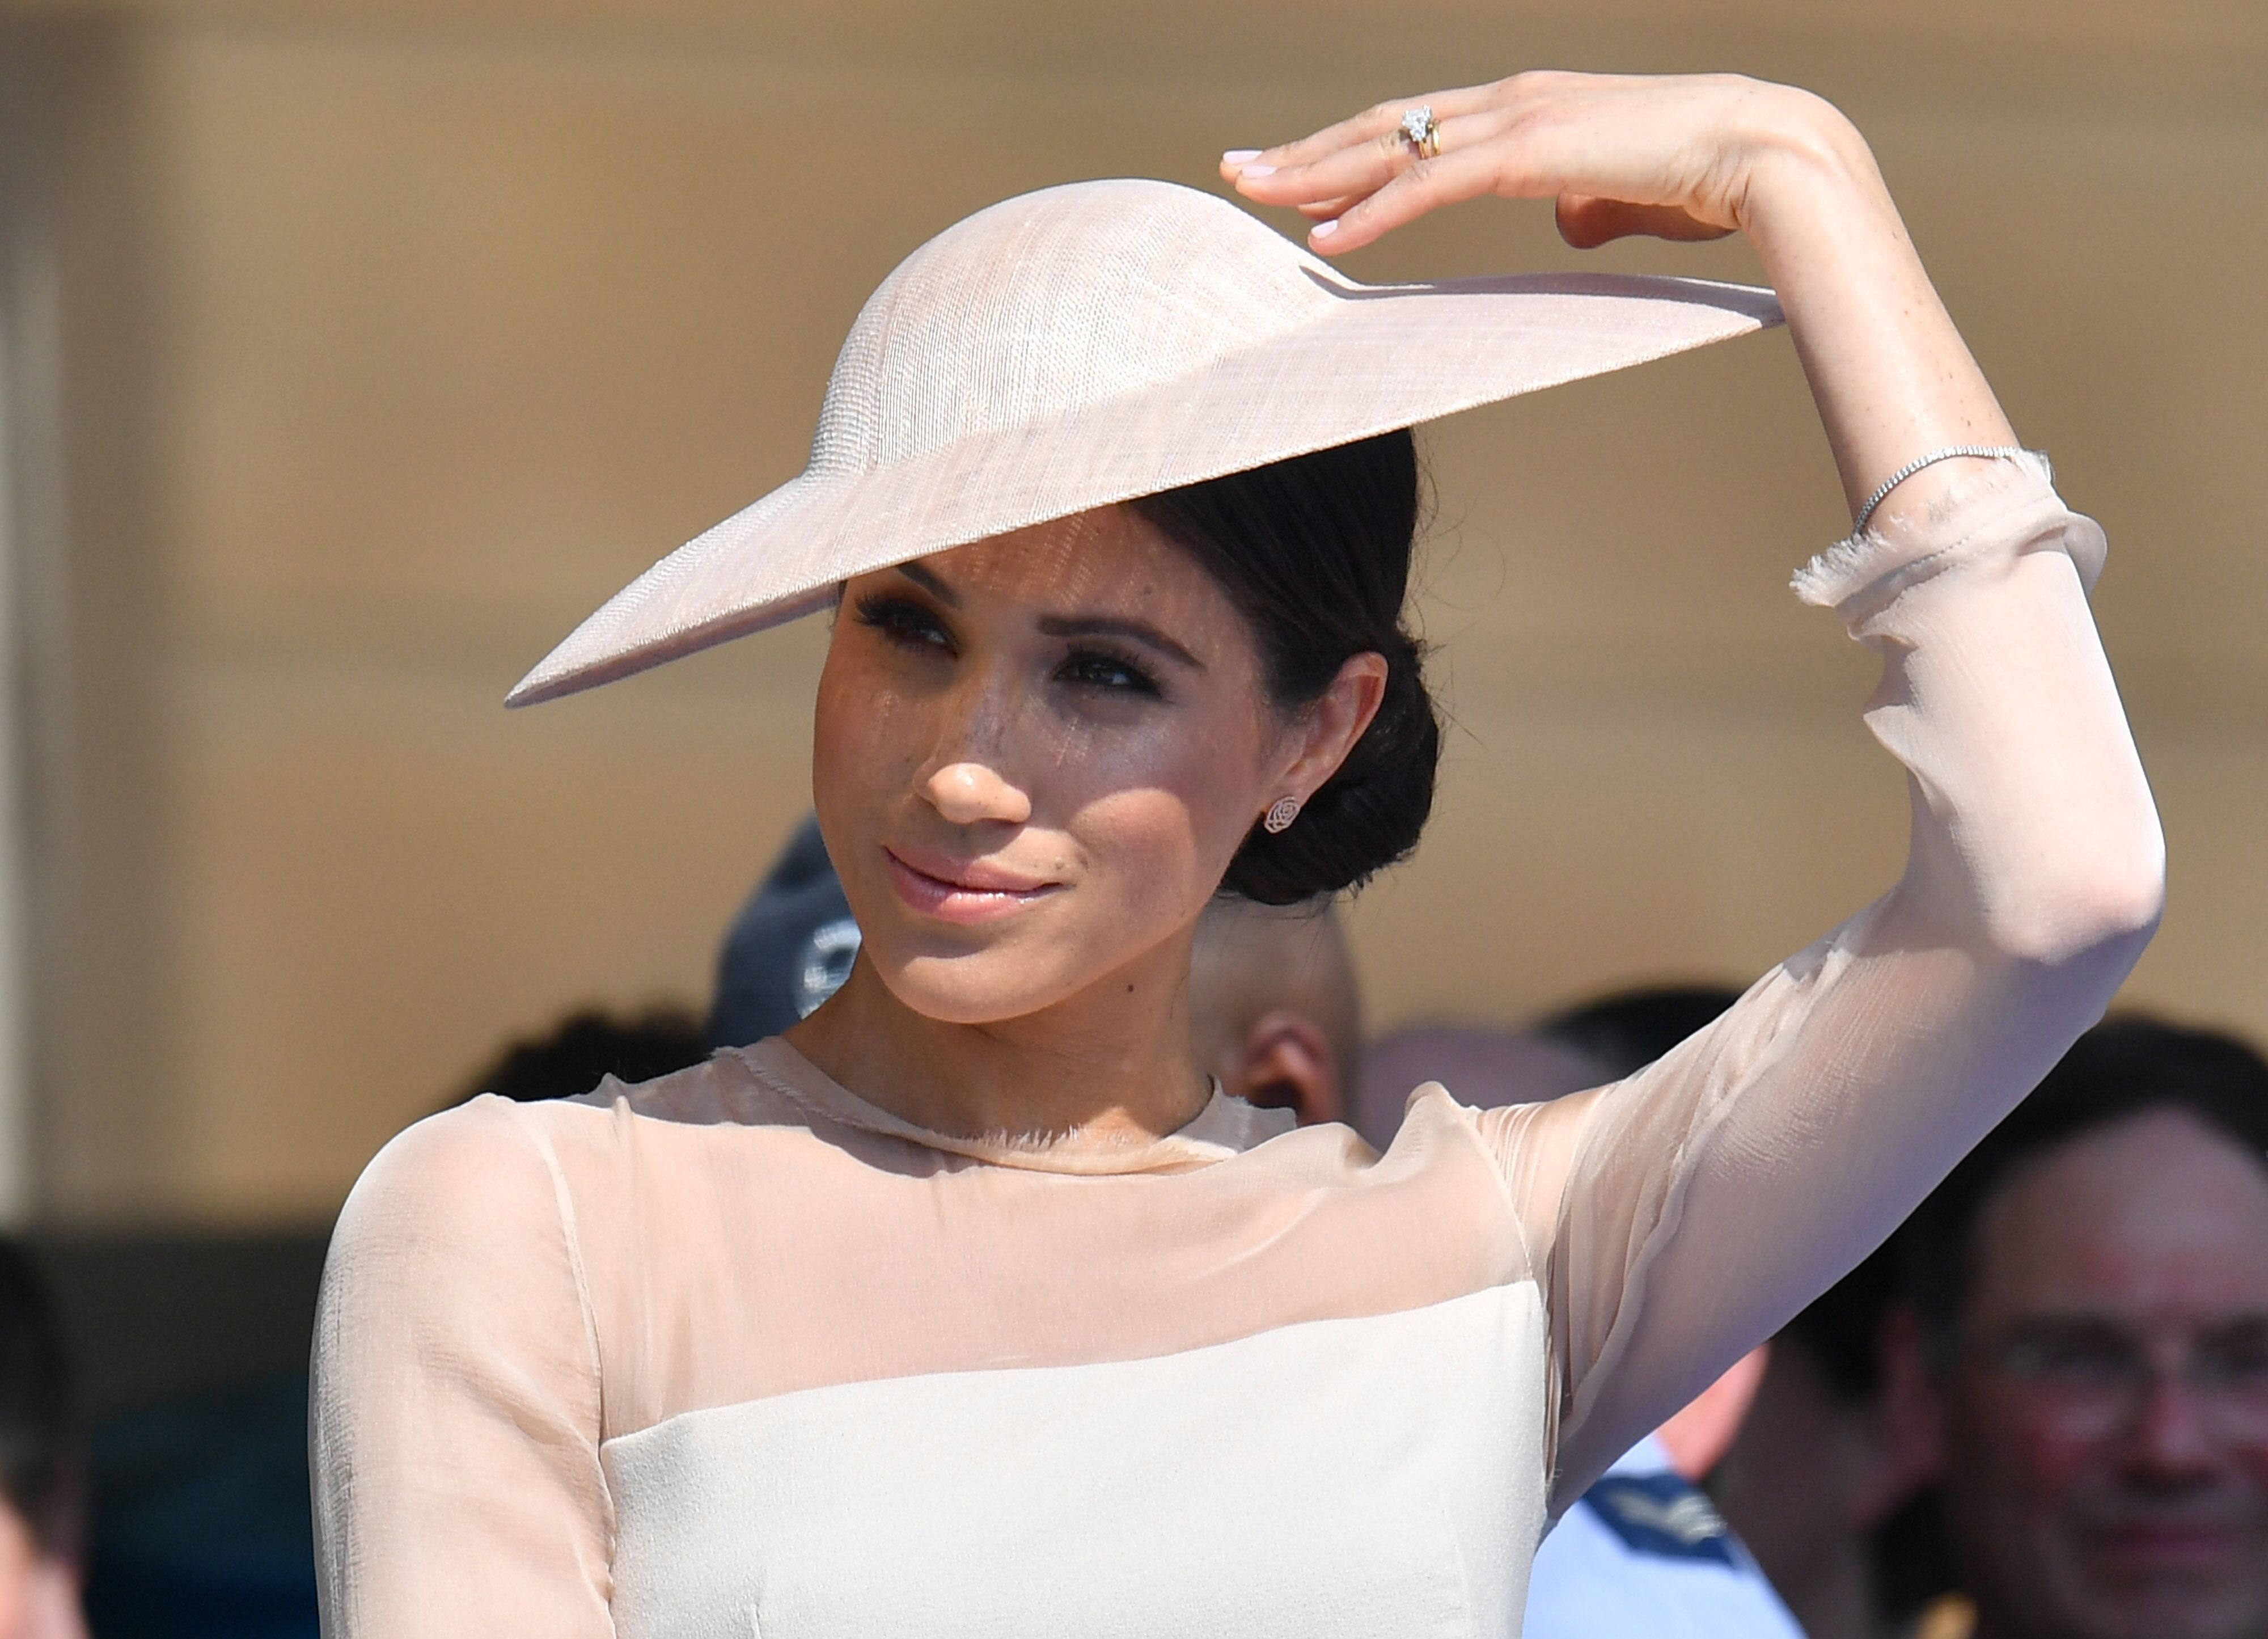 A portrait of Meghan Markle attending an official Royal event | Source: Getty Images/GlobalImagesUkraine